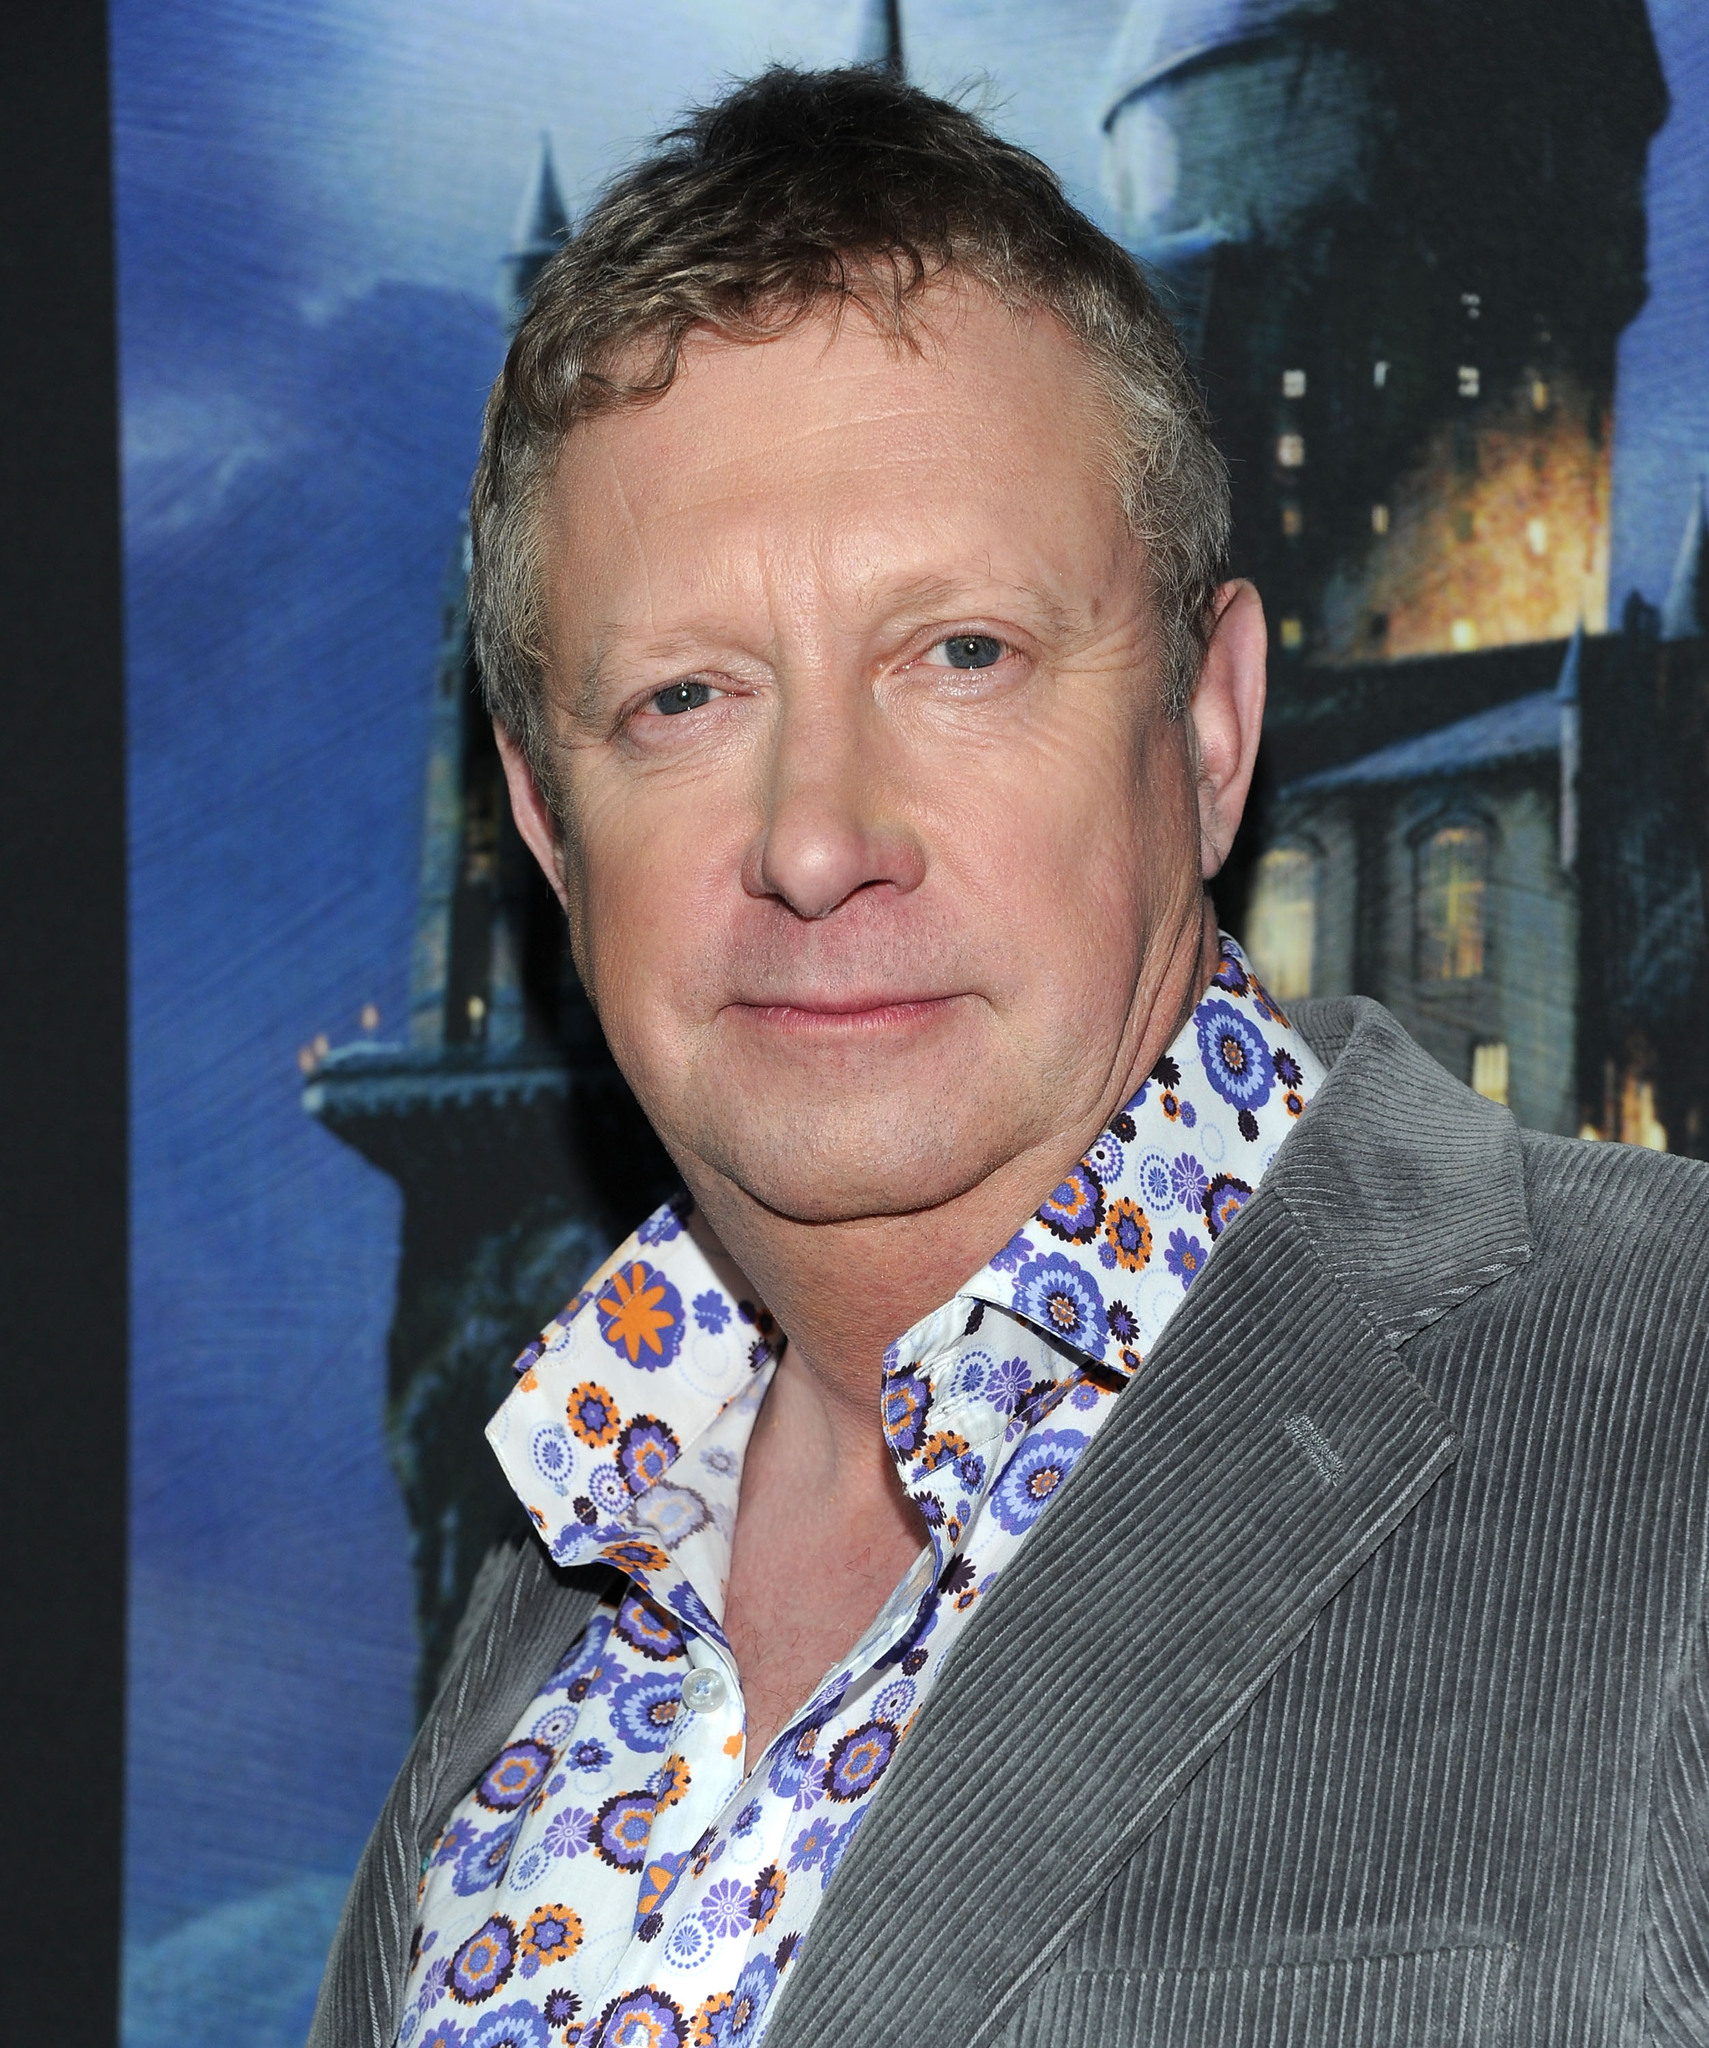 Who played the character of Arthur Weasley's father in the Harry Potter films?